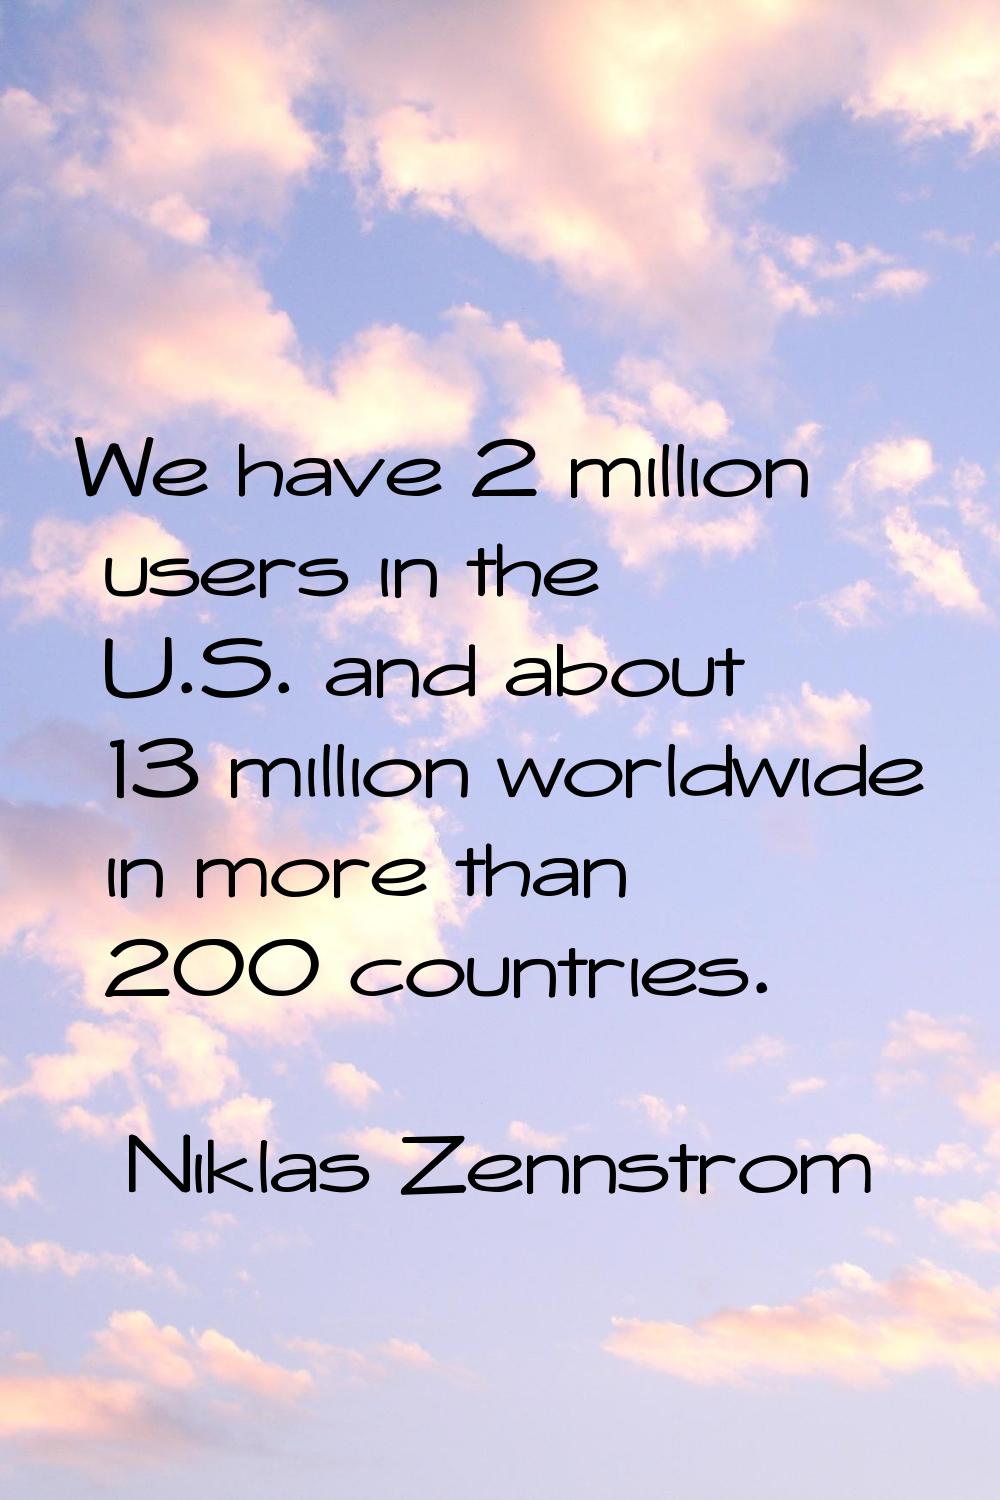 We have 2 million users in the U.S. and about 13 million worldwide in more than 200 countries.